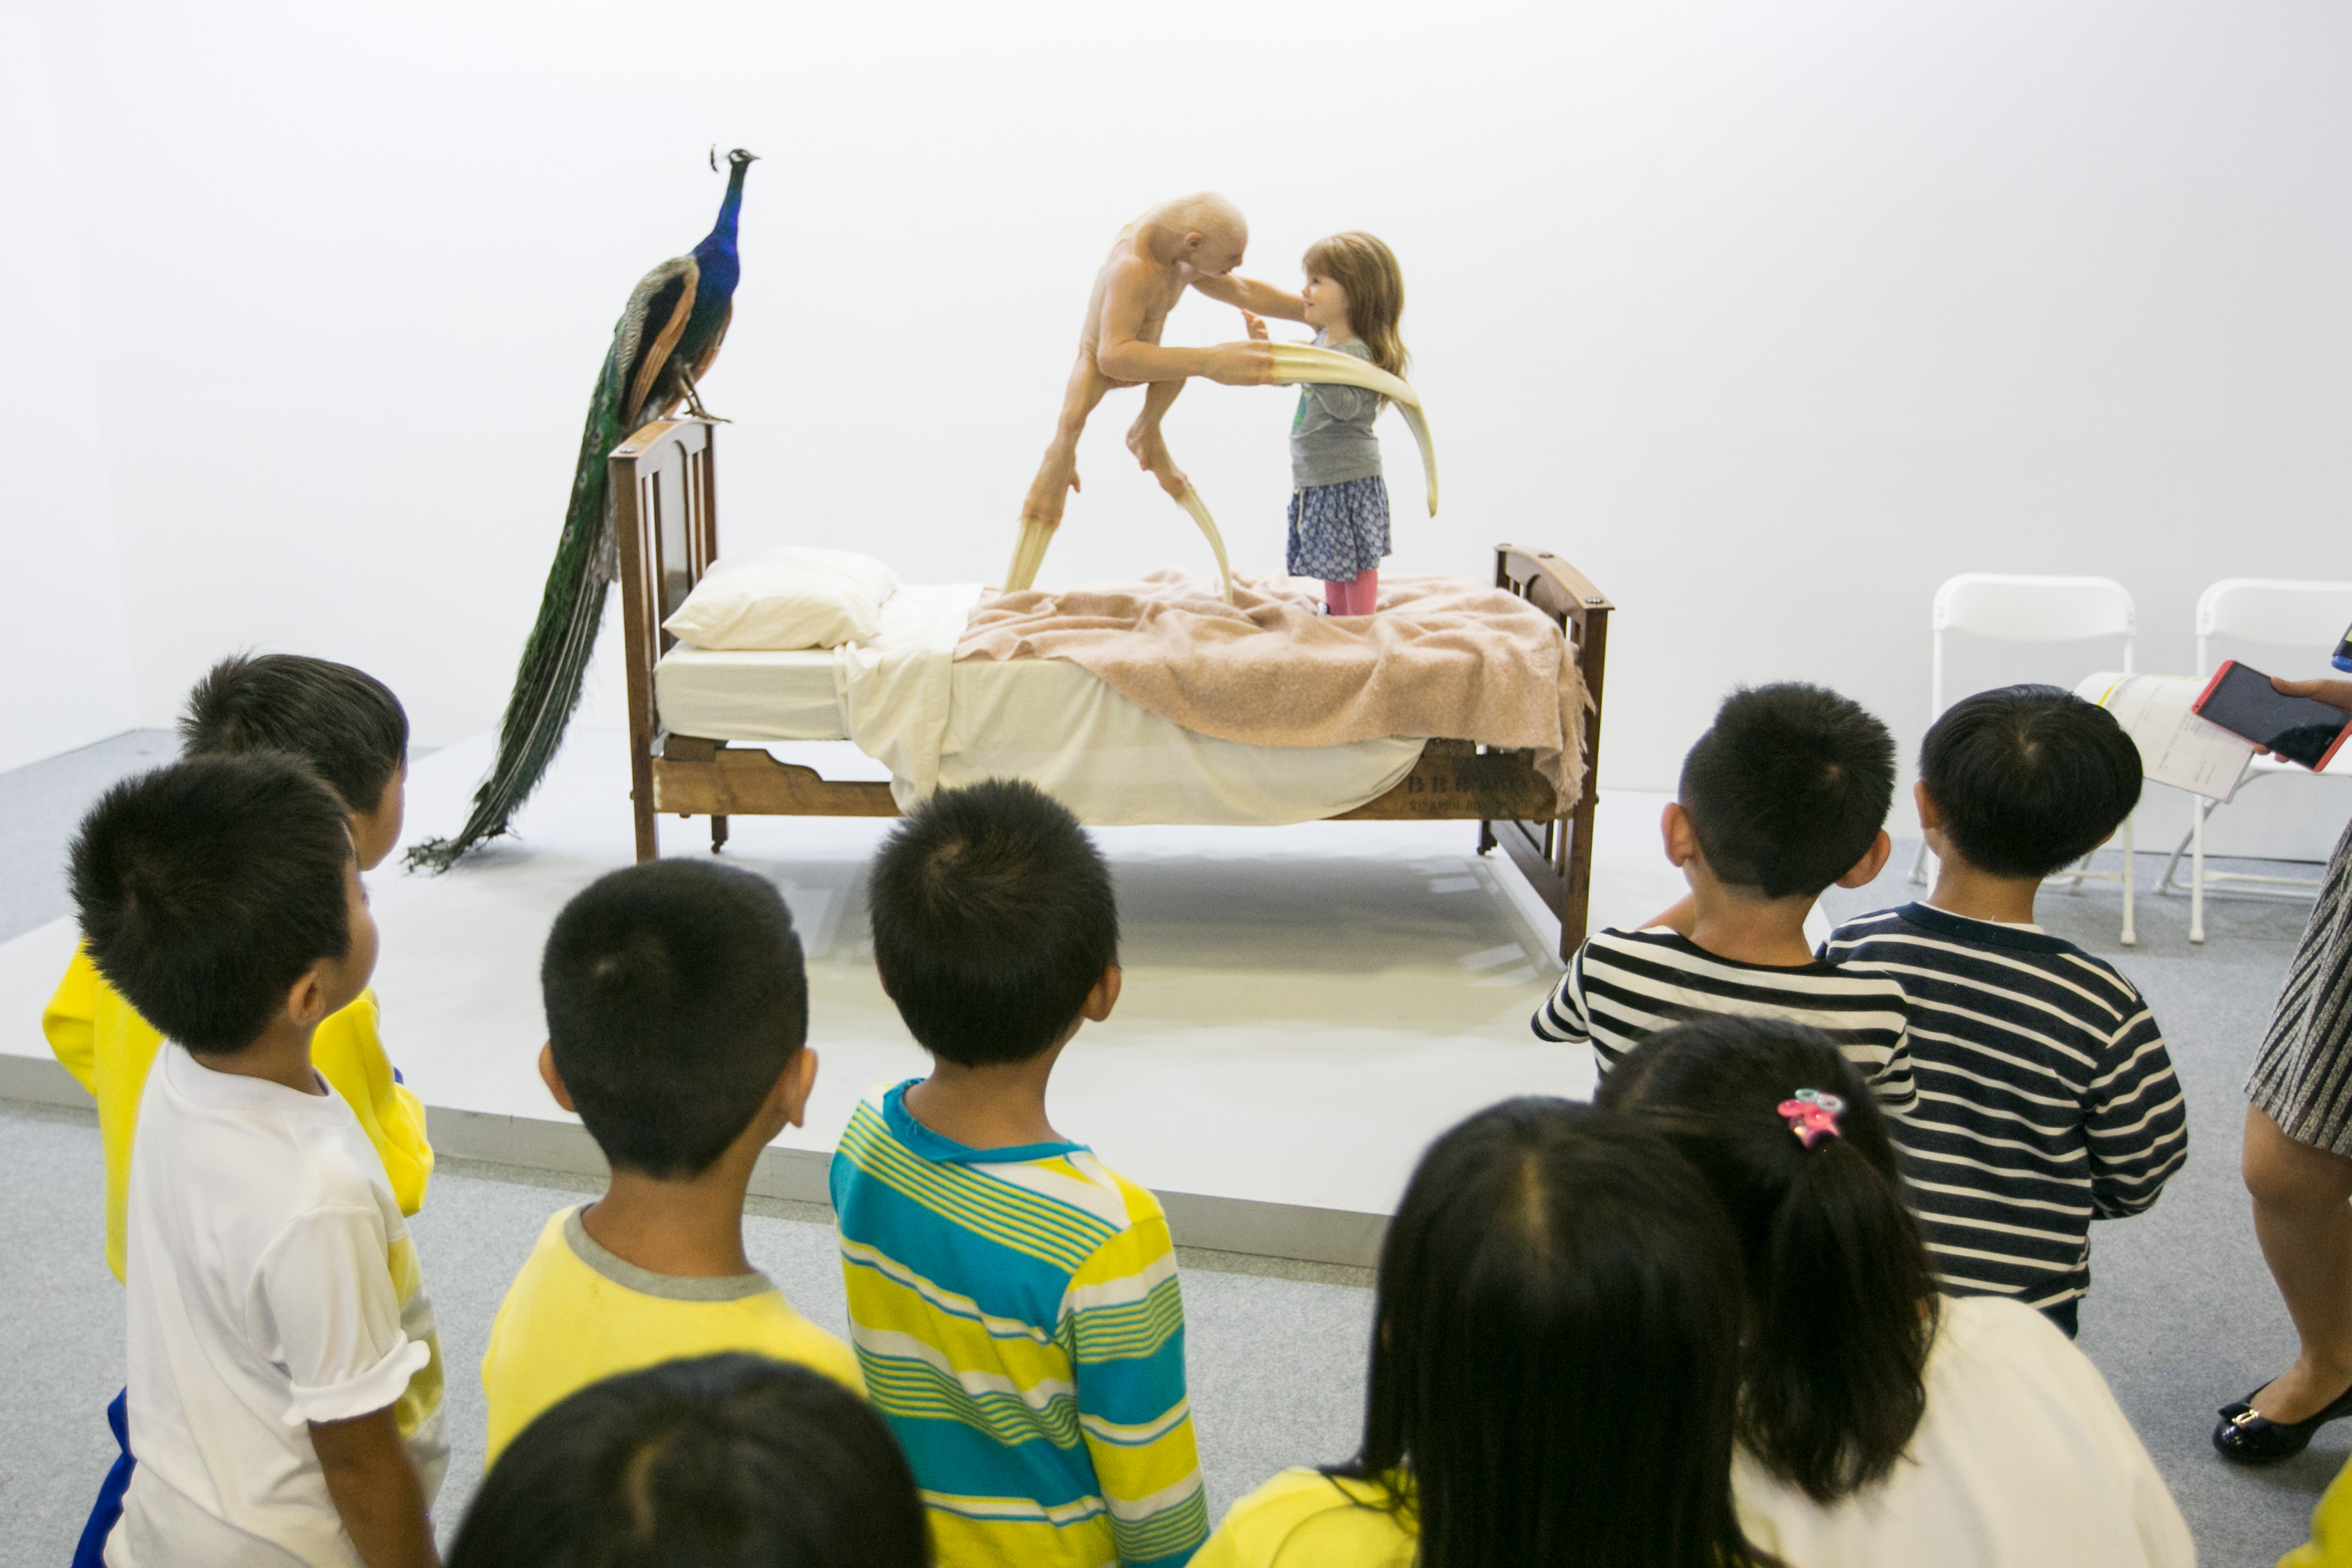 ART TAIPEI sows new shoots of art education. The photo shows that visiting students focused on an artwork on the first Art Education Day in 2016.